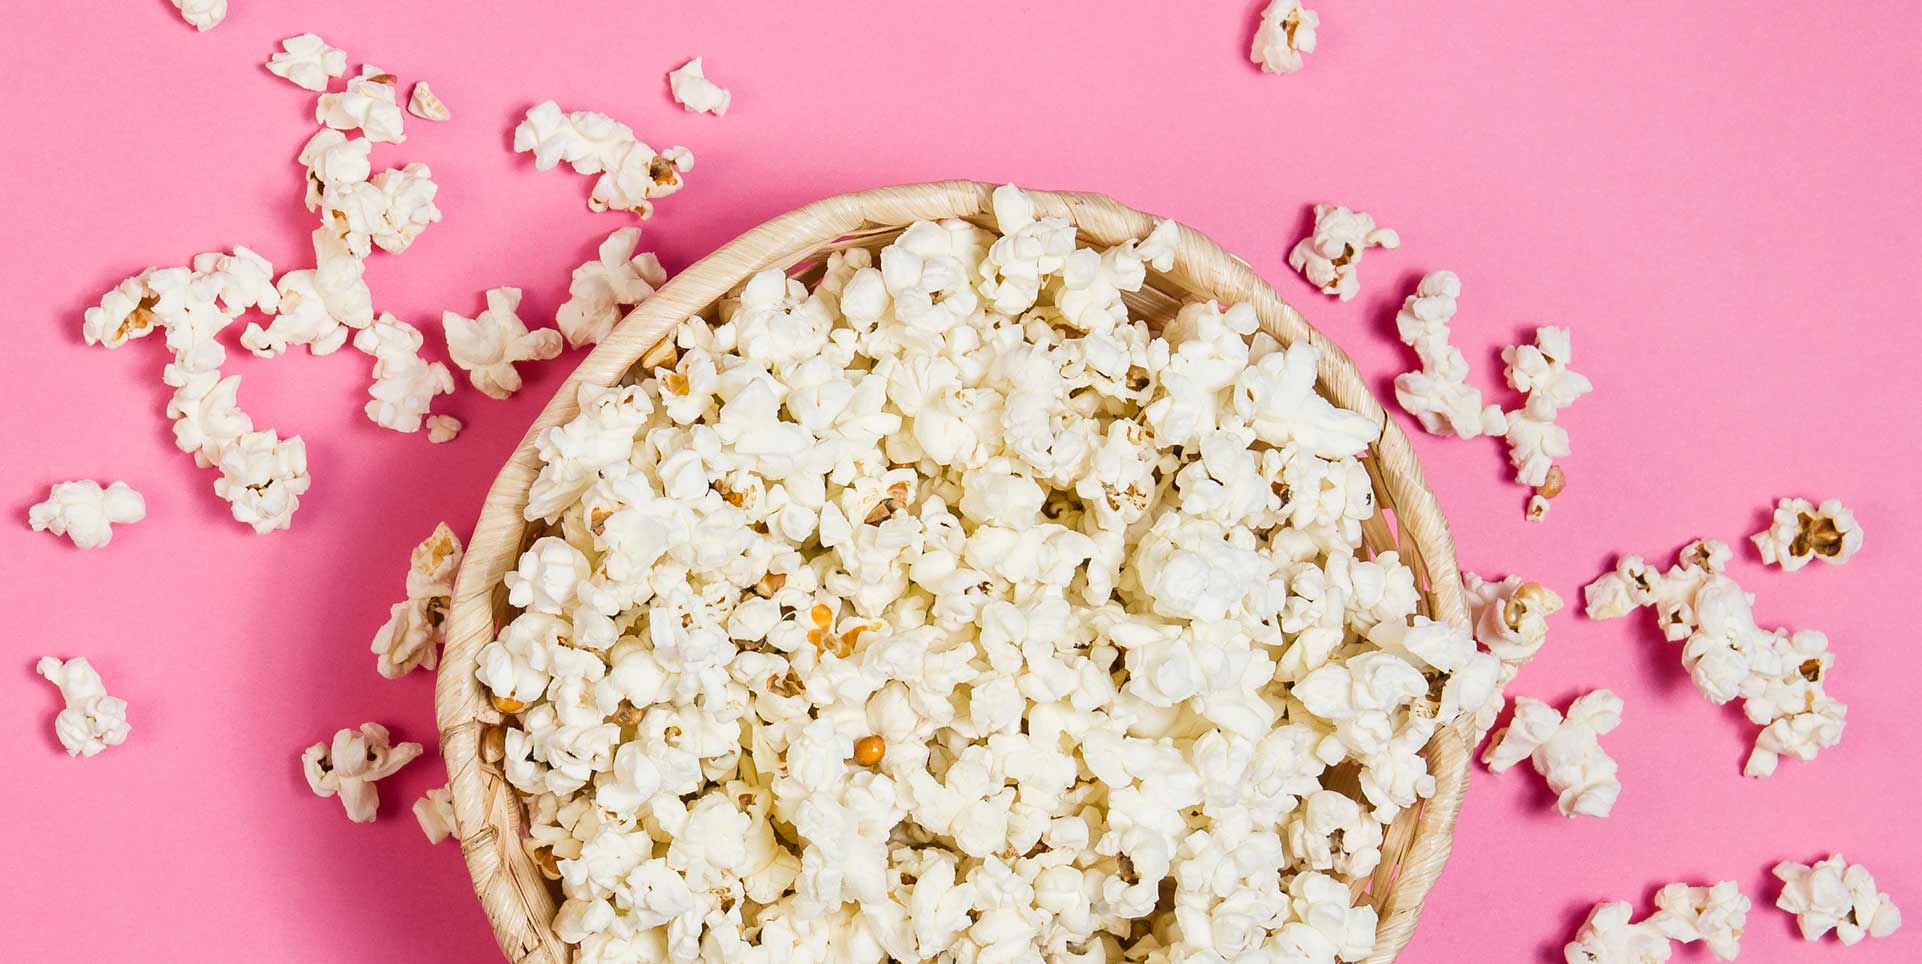 Top-down view of popcorn in a woven basket spilling over onto a pink background